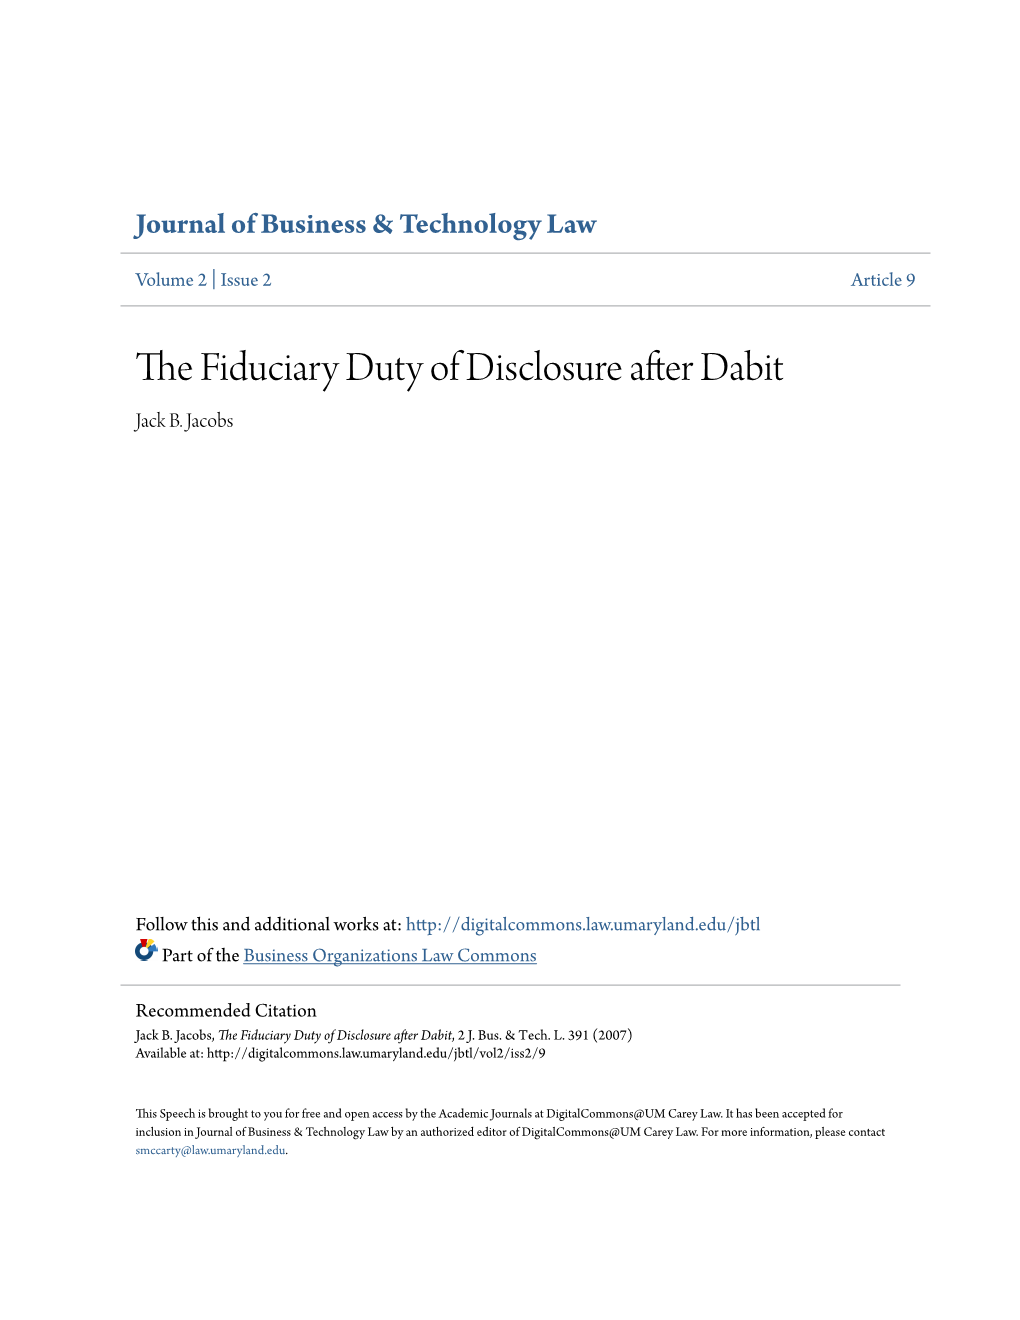 The Fiduciary Duty of Disclosure After Dabit, 2 J